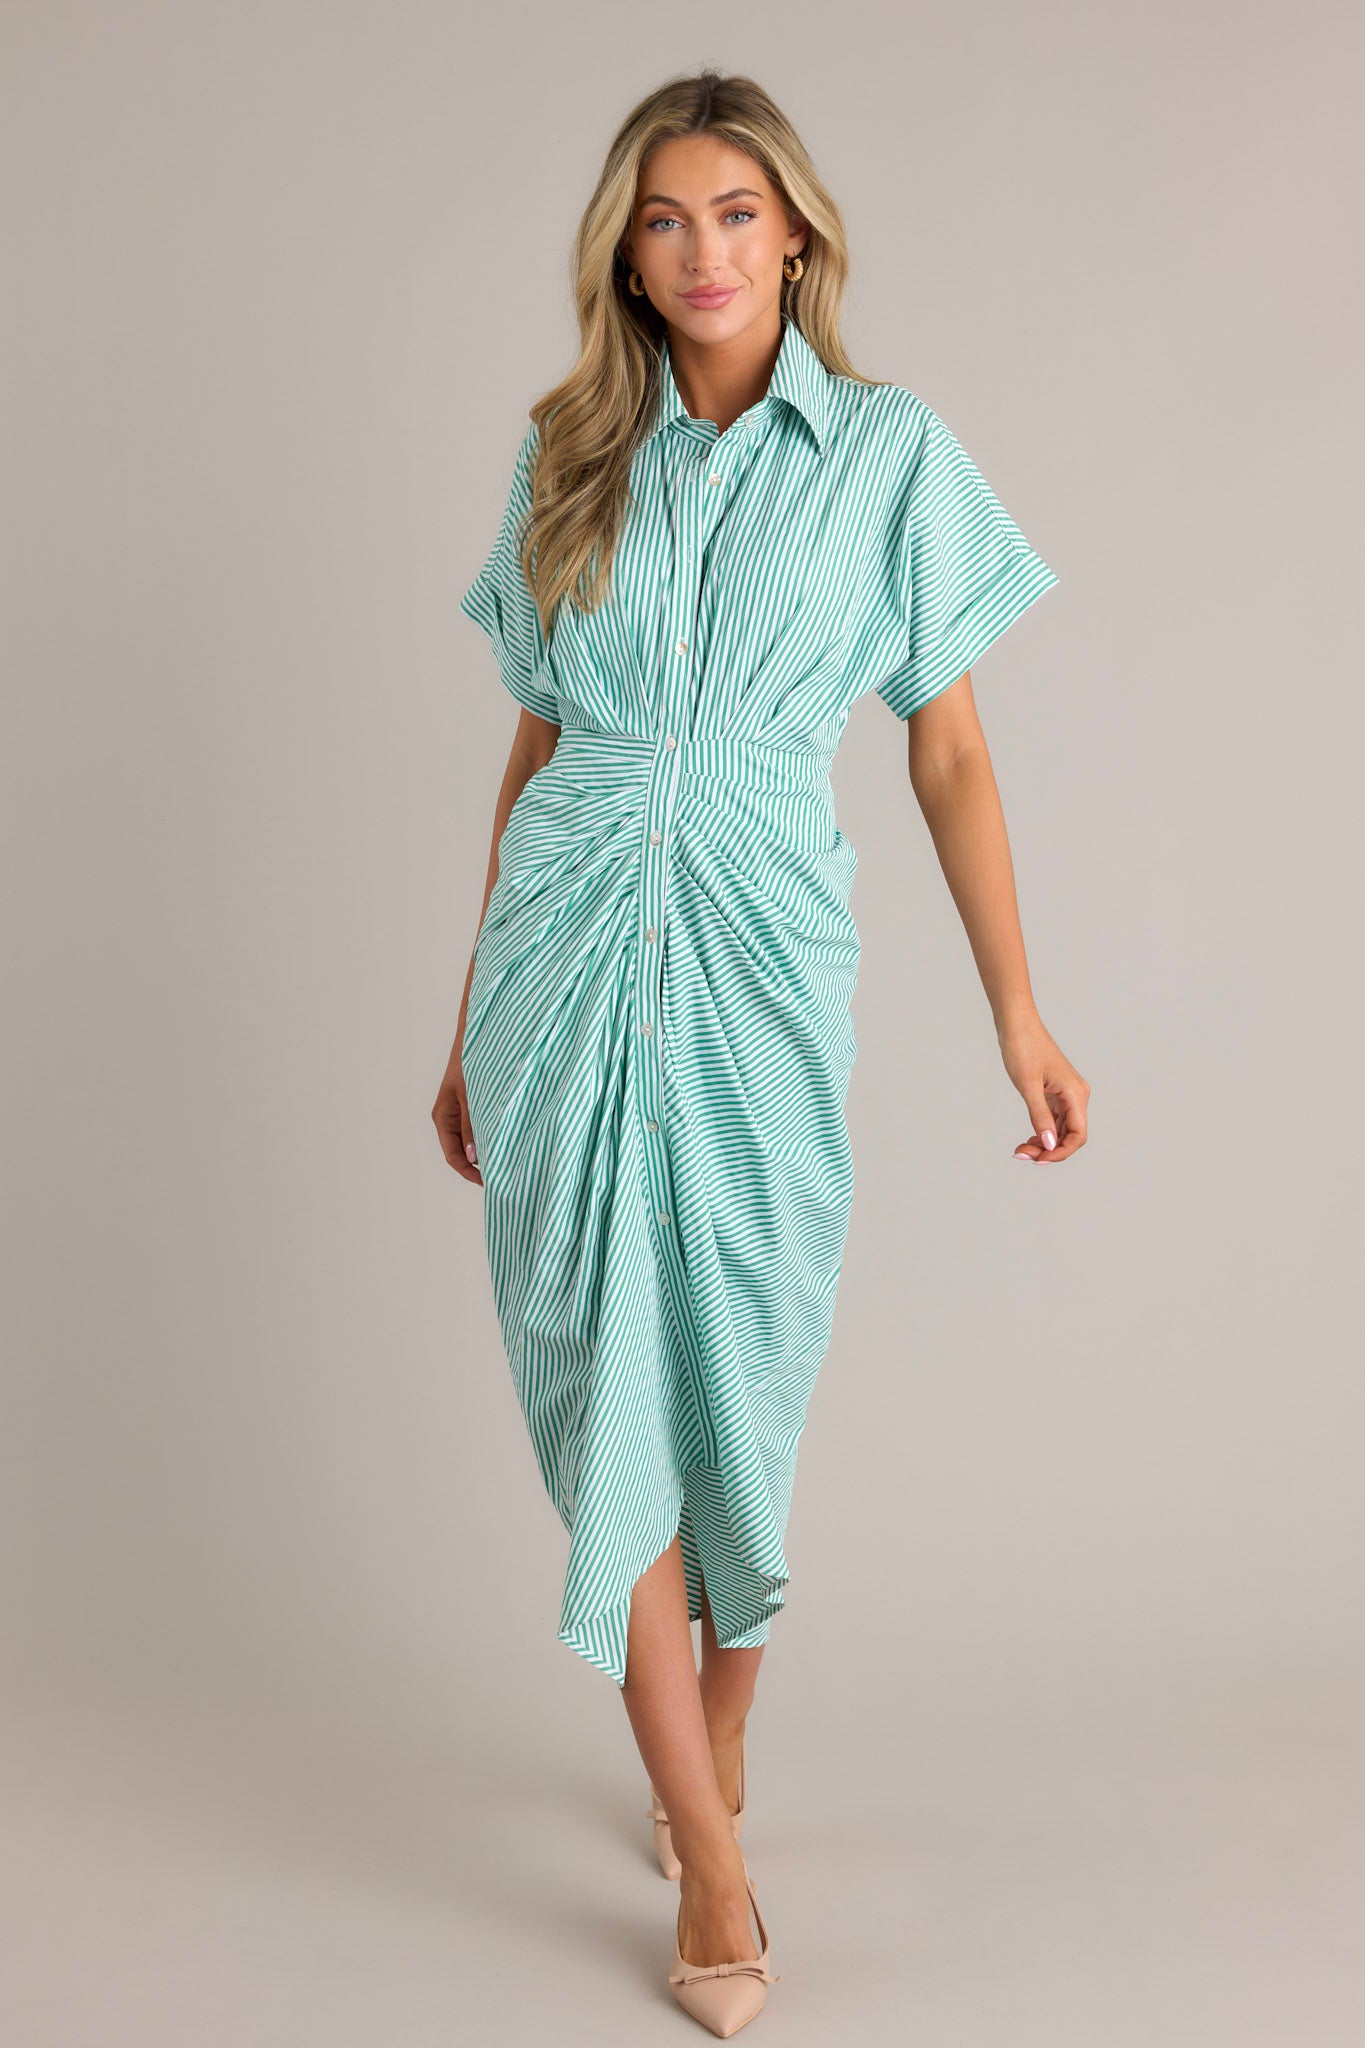 Action shot of a green stripe midi dress displaying the fit and movement, highlighting the collared neckline, full button front, self-tie waist feature, front slit, and short sleeves.